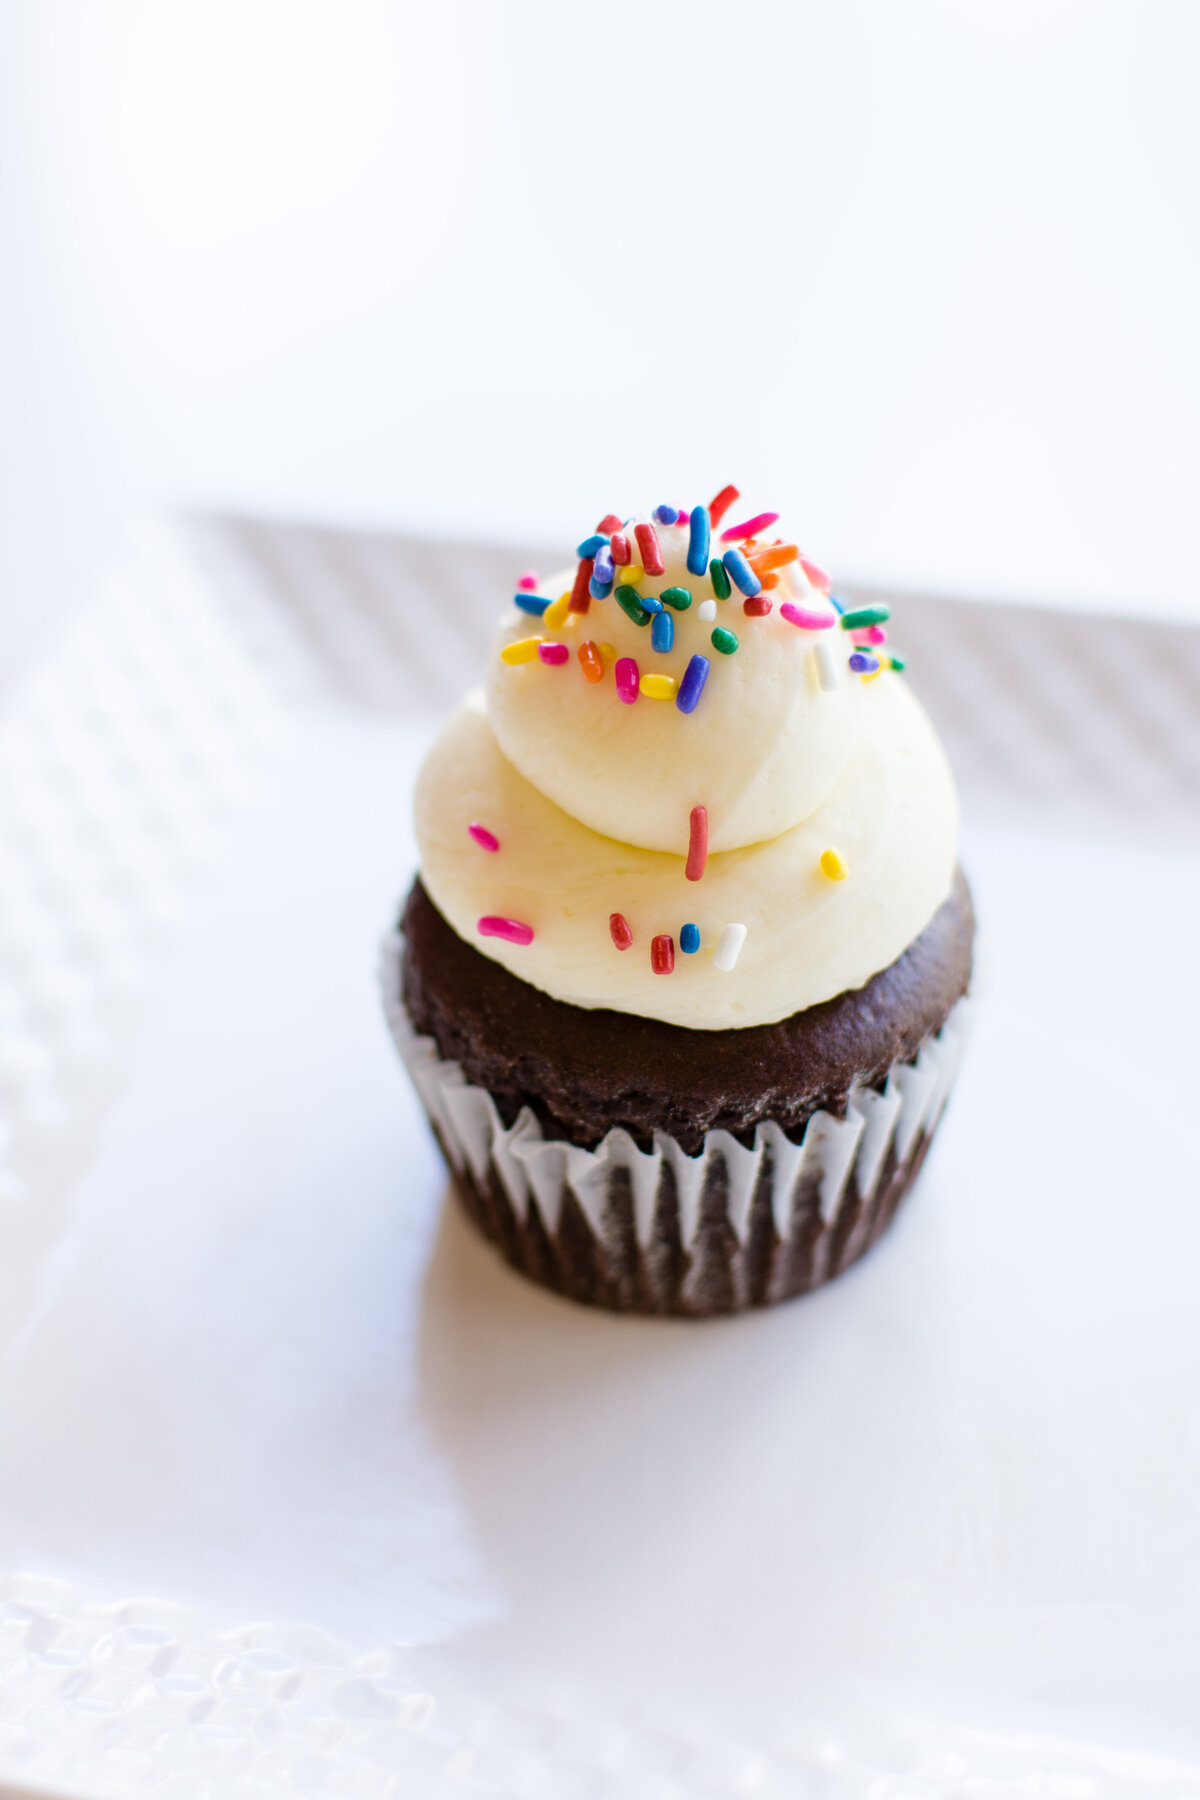 Chocolate cupcake with white icing and colorful sprinkles  on top